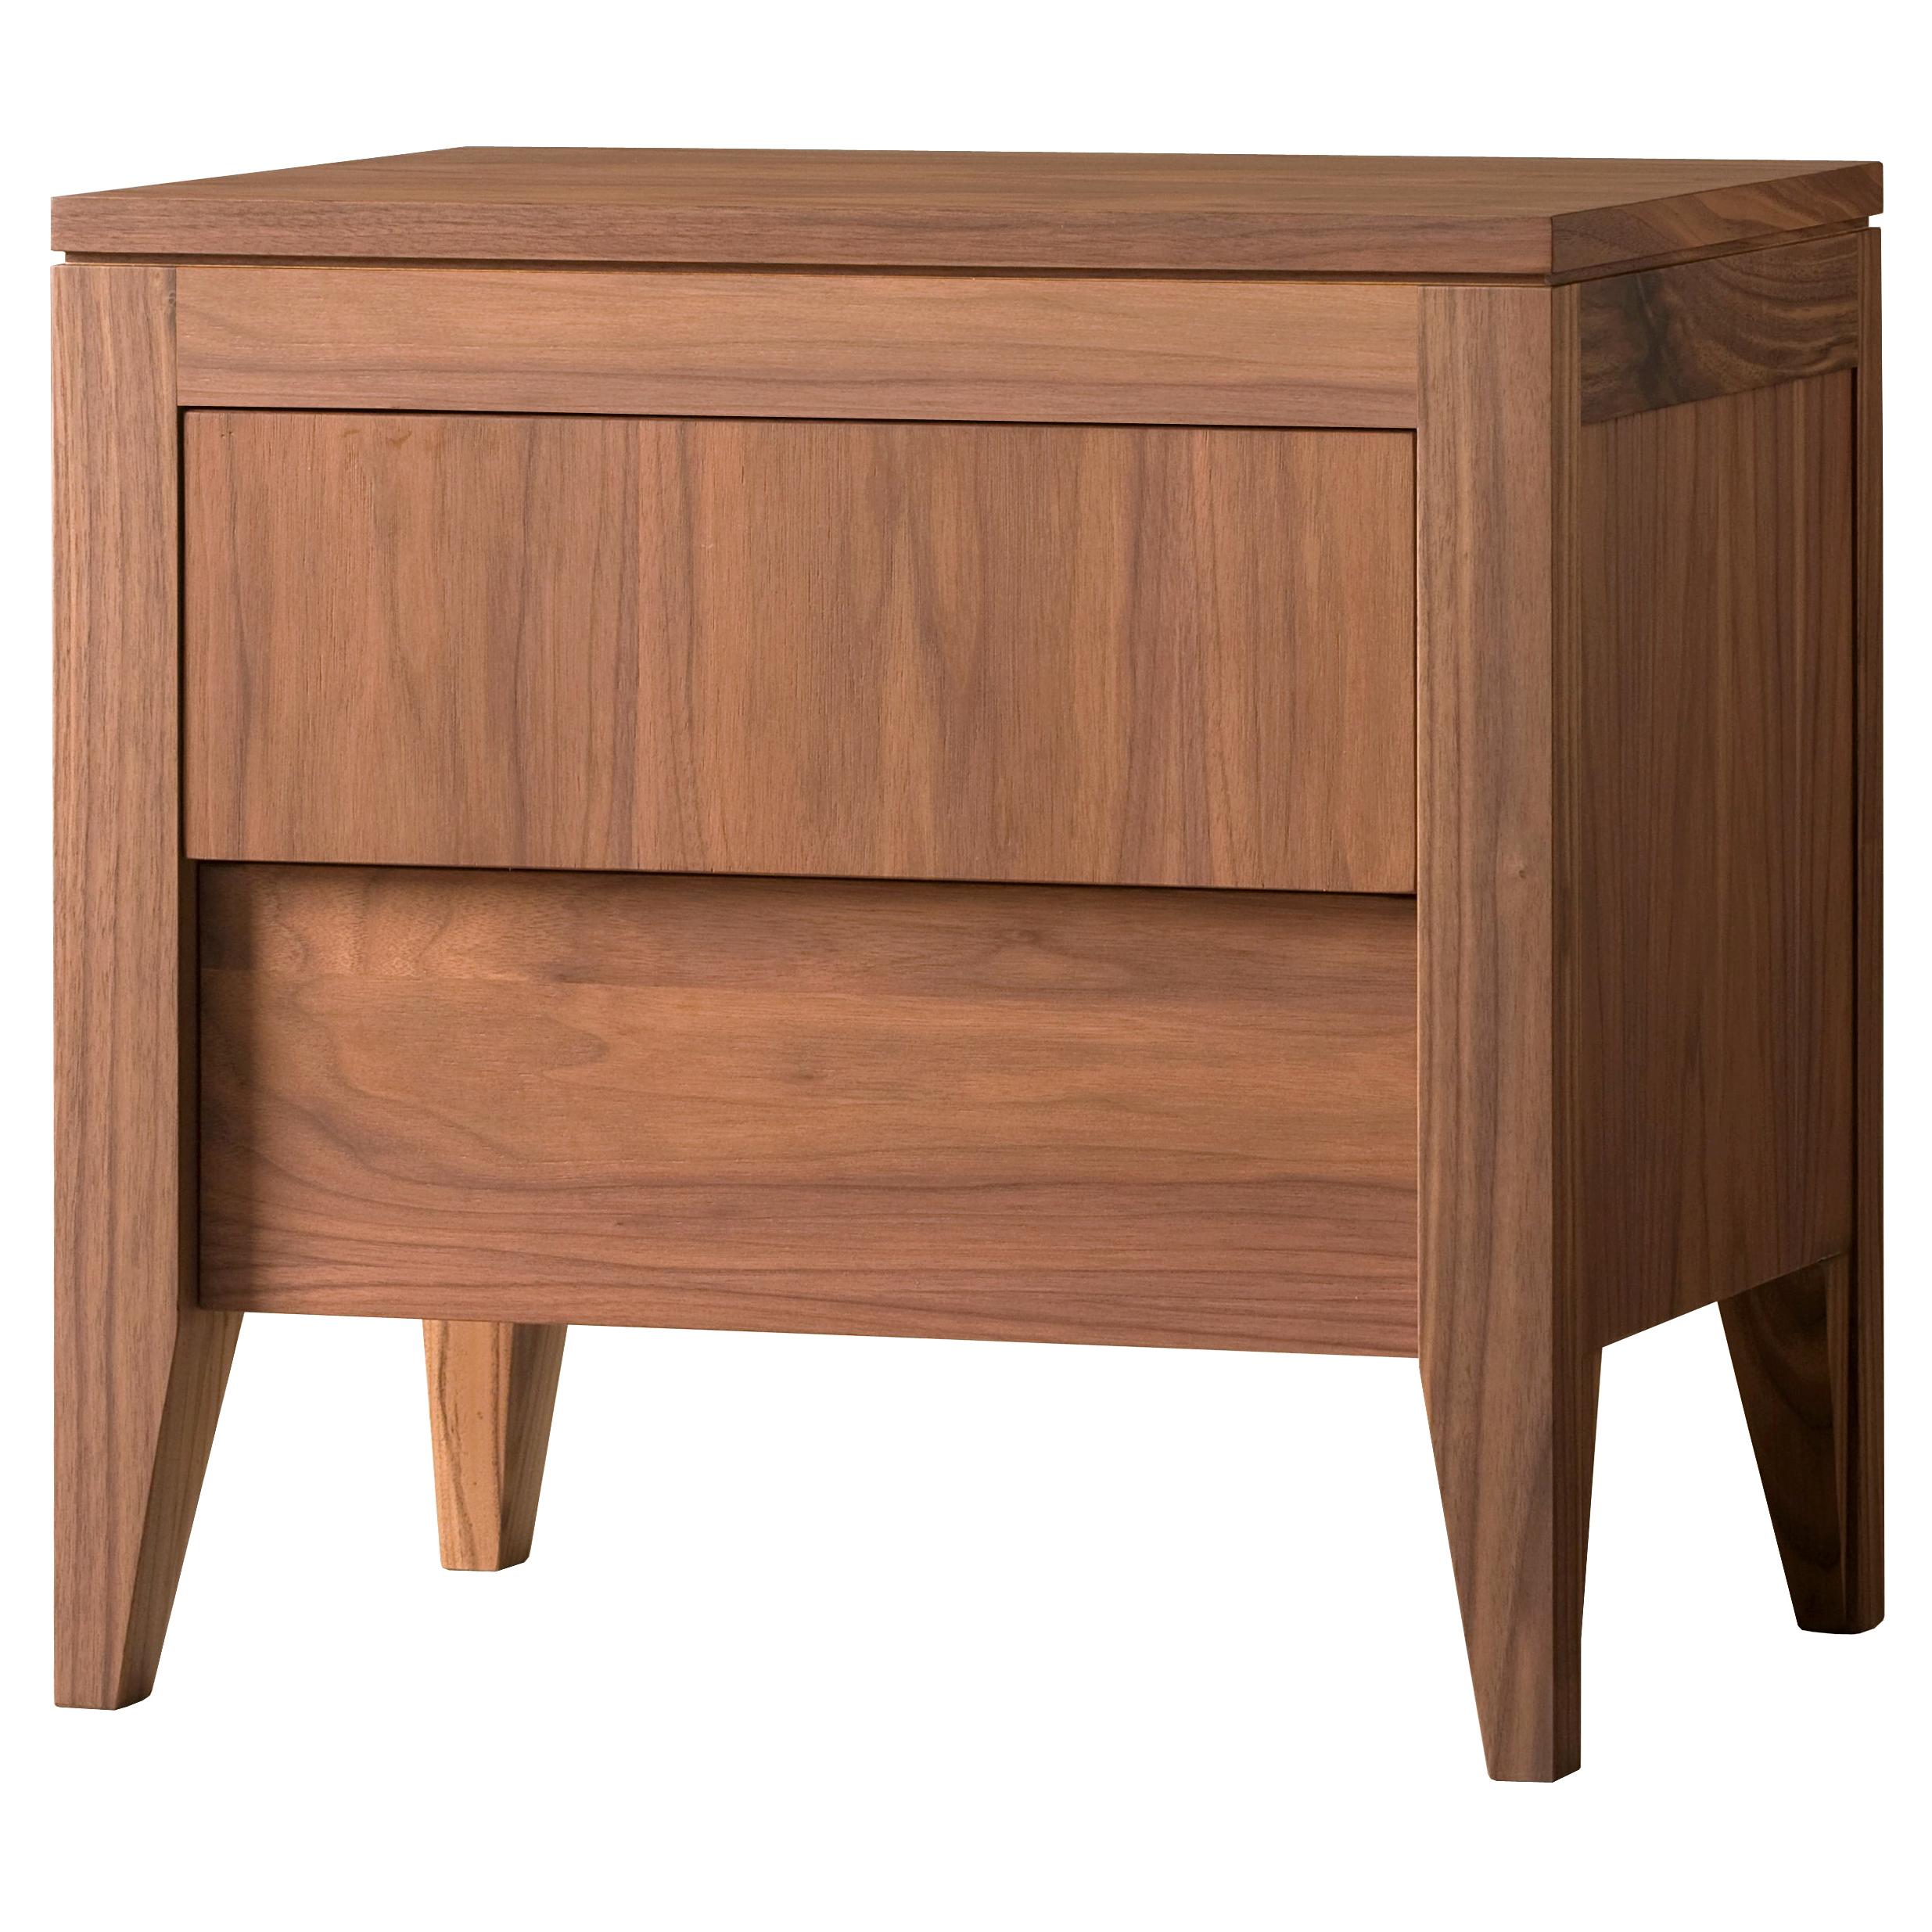 Anerio Bedside Table, Made of Canaletto Walnut Wood